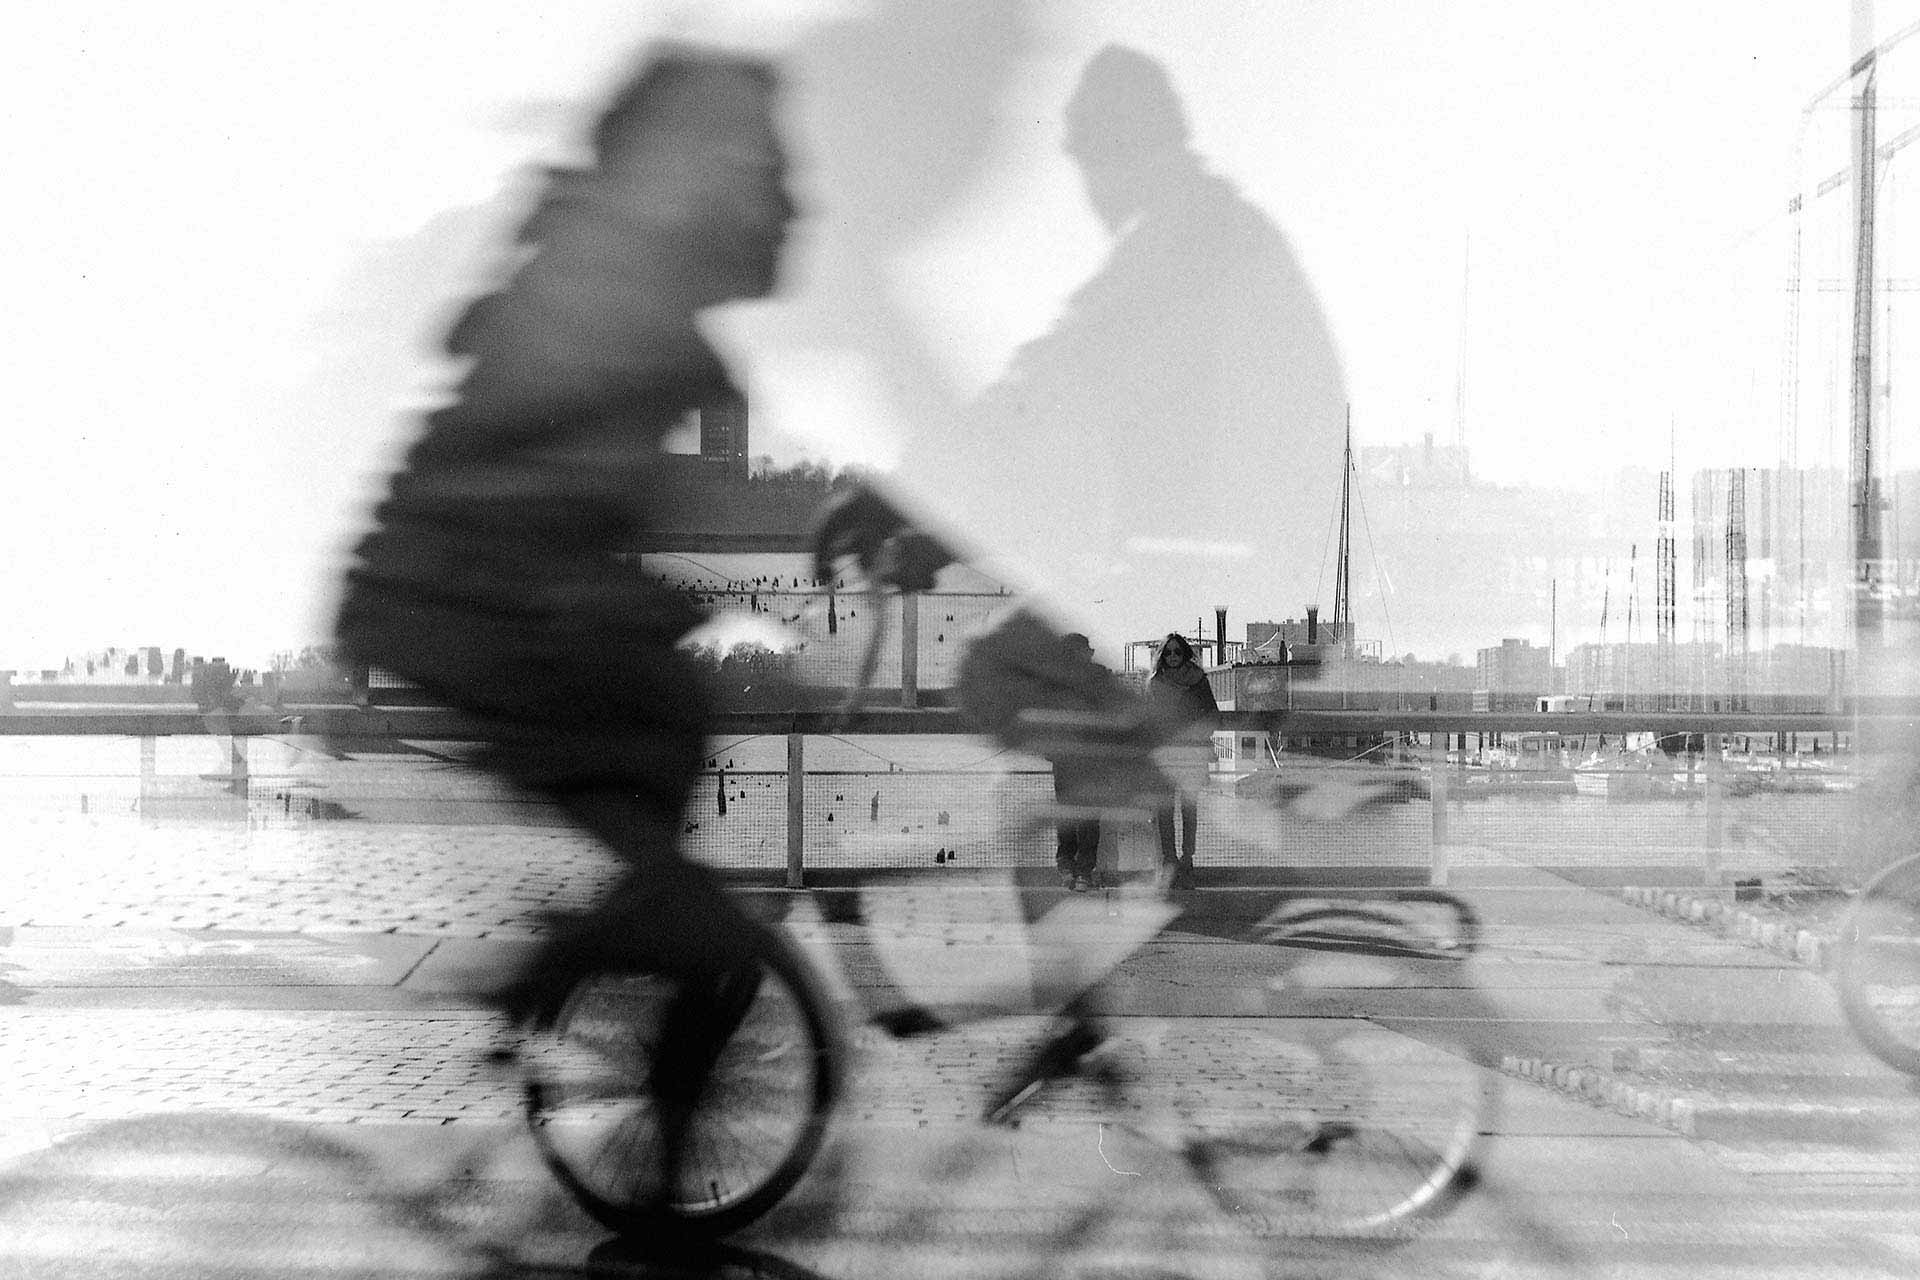 Double exposed photo of bicyclists